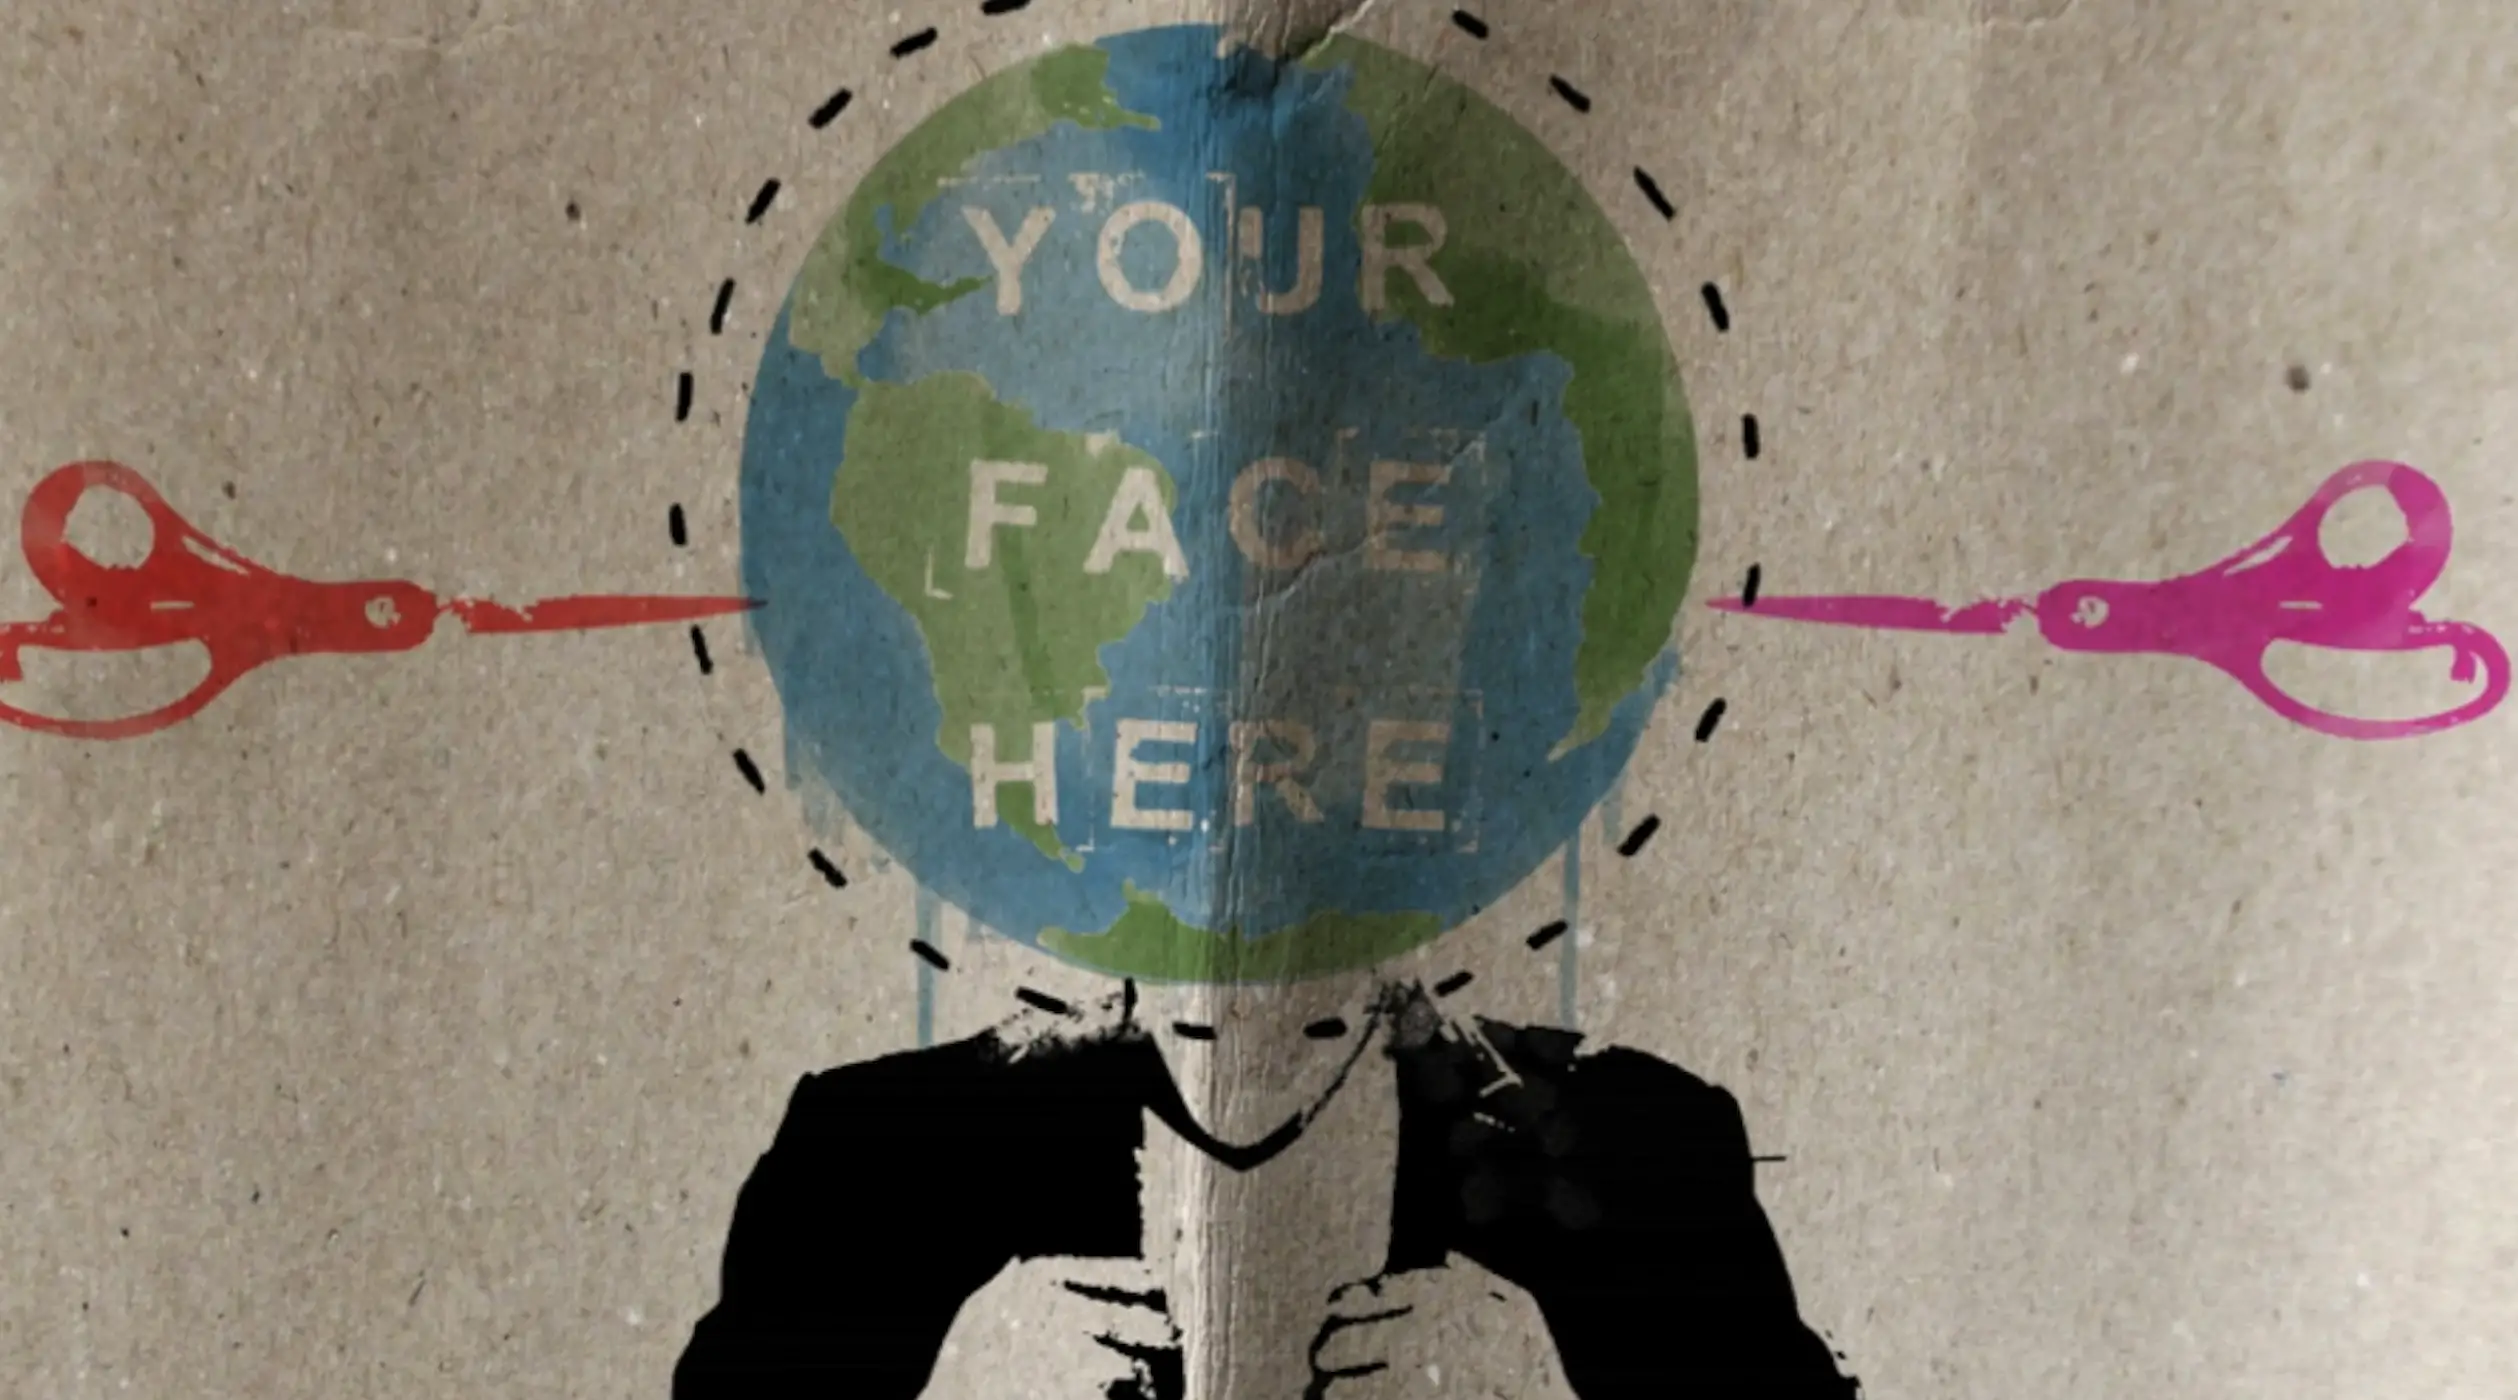 FootPrint Coalition Artwork saying, "Your Face Here"